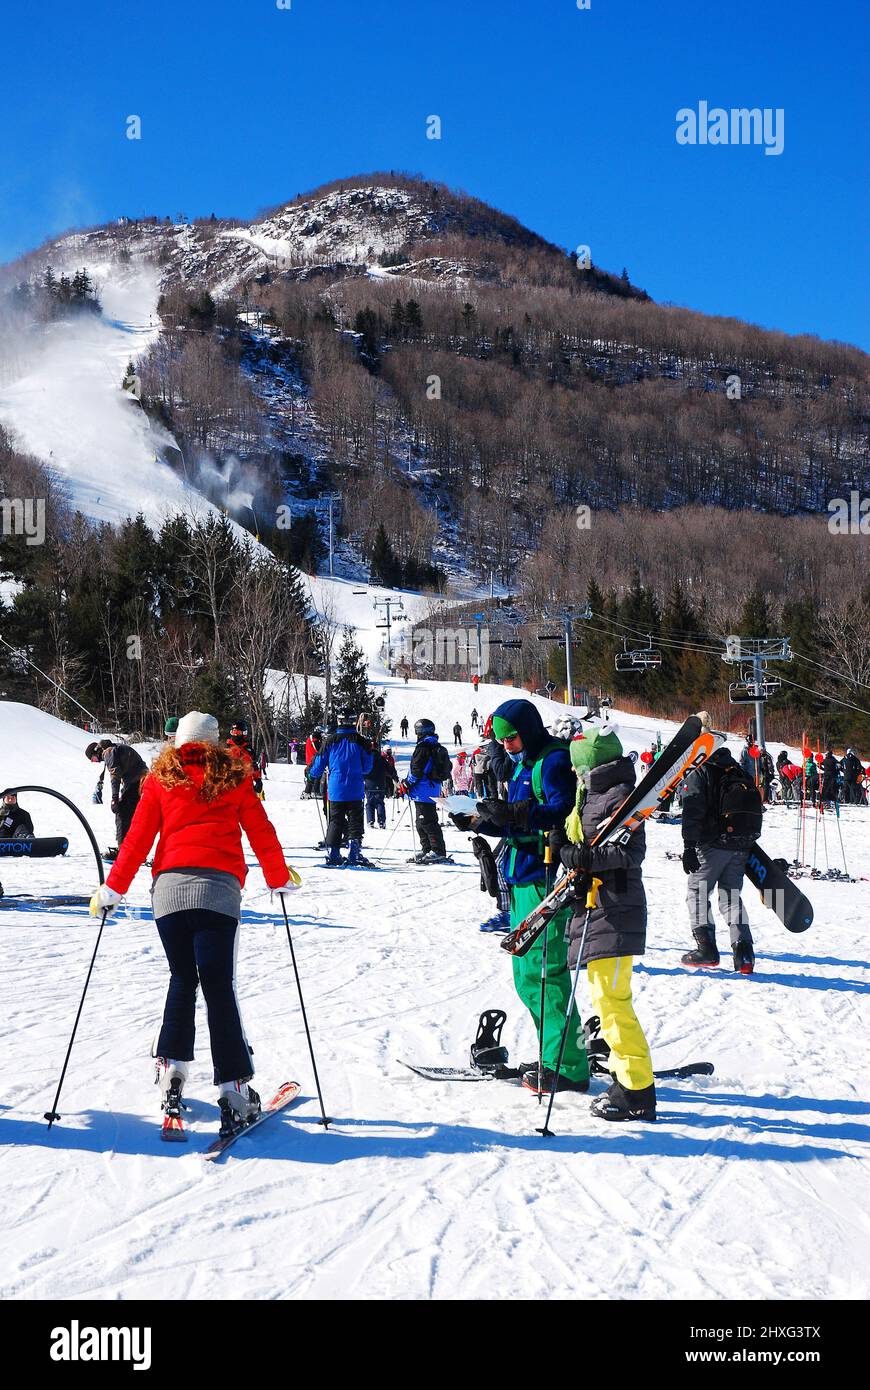 Skiers prepare themselves to take on the highest peak at a resort Stock Photo